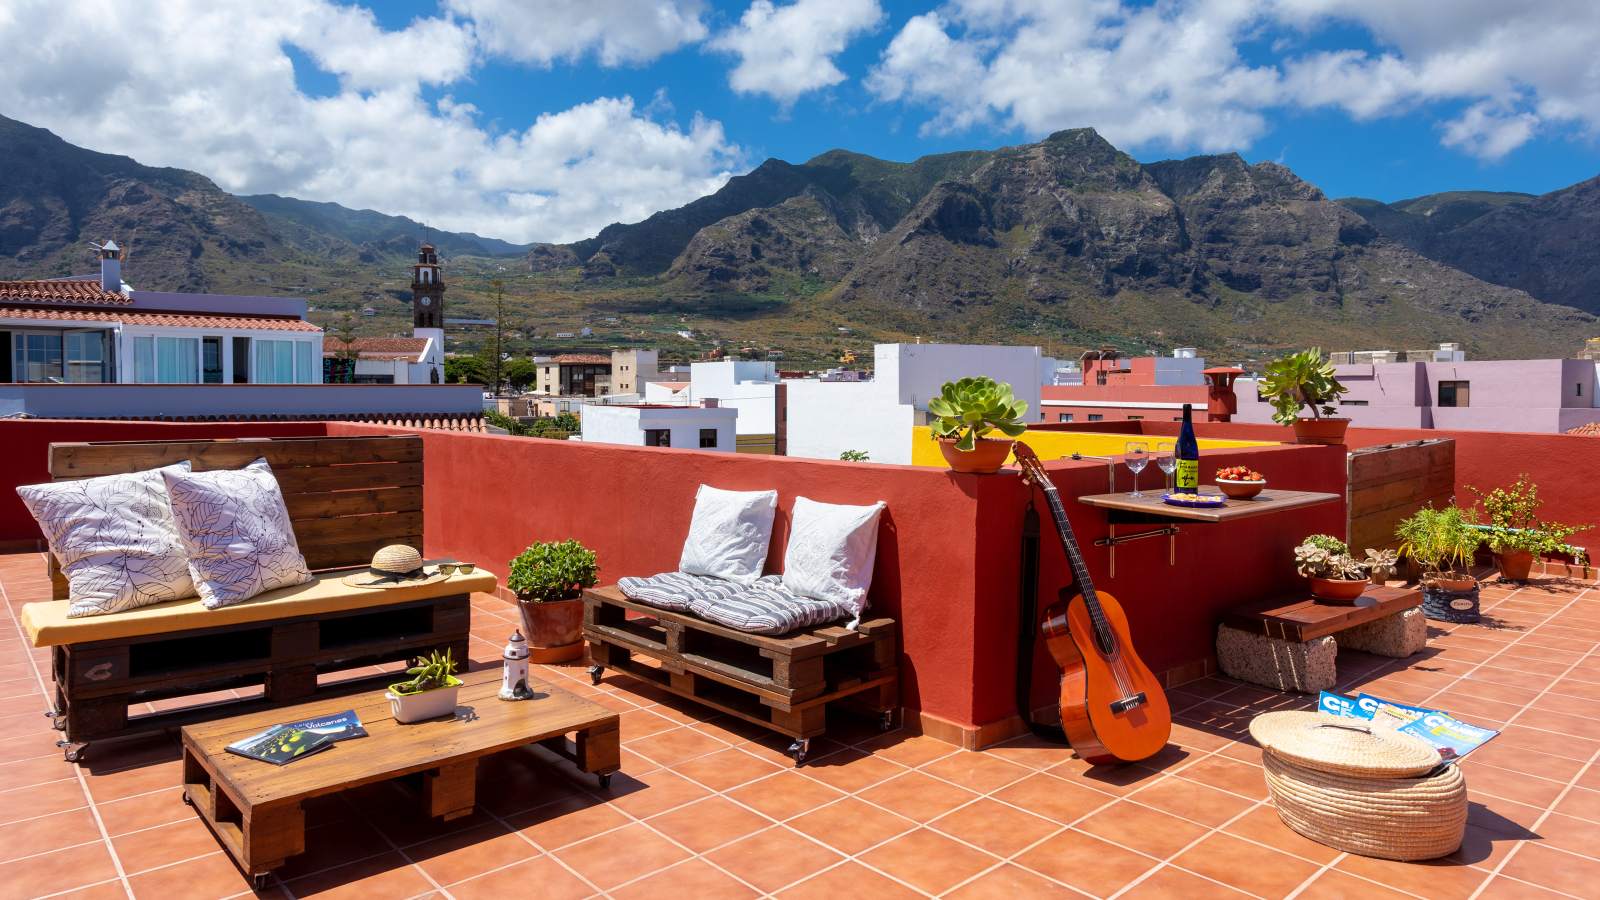 Views of Teno Rural Park from the roof terrace of Tabaiba Guesthouse: your hostel in Tenerife